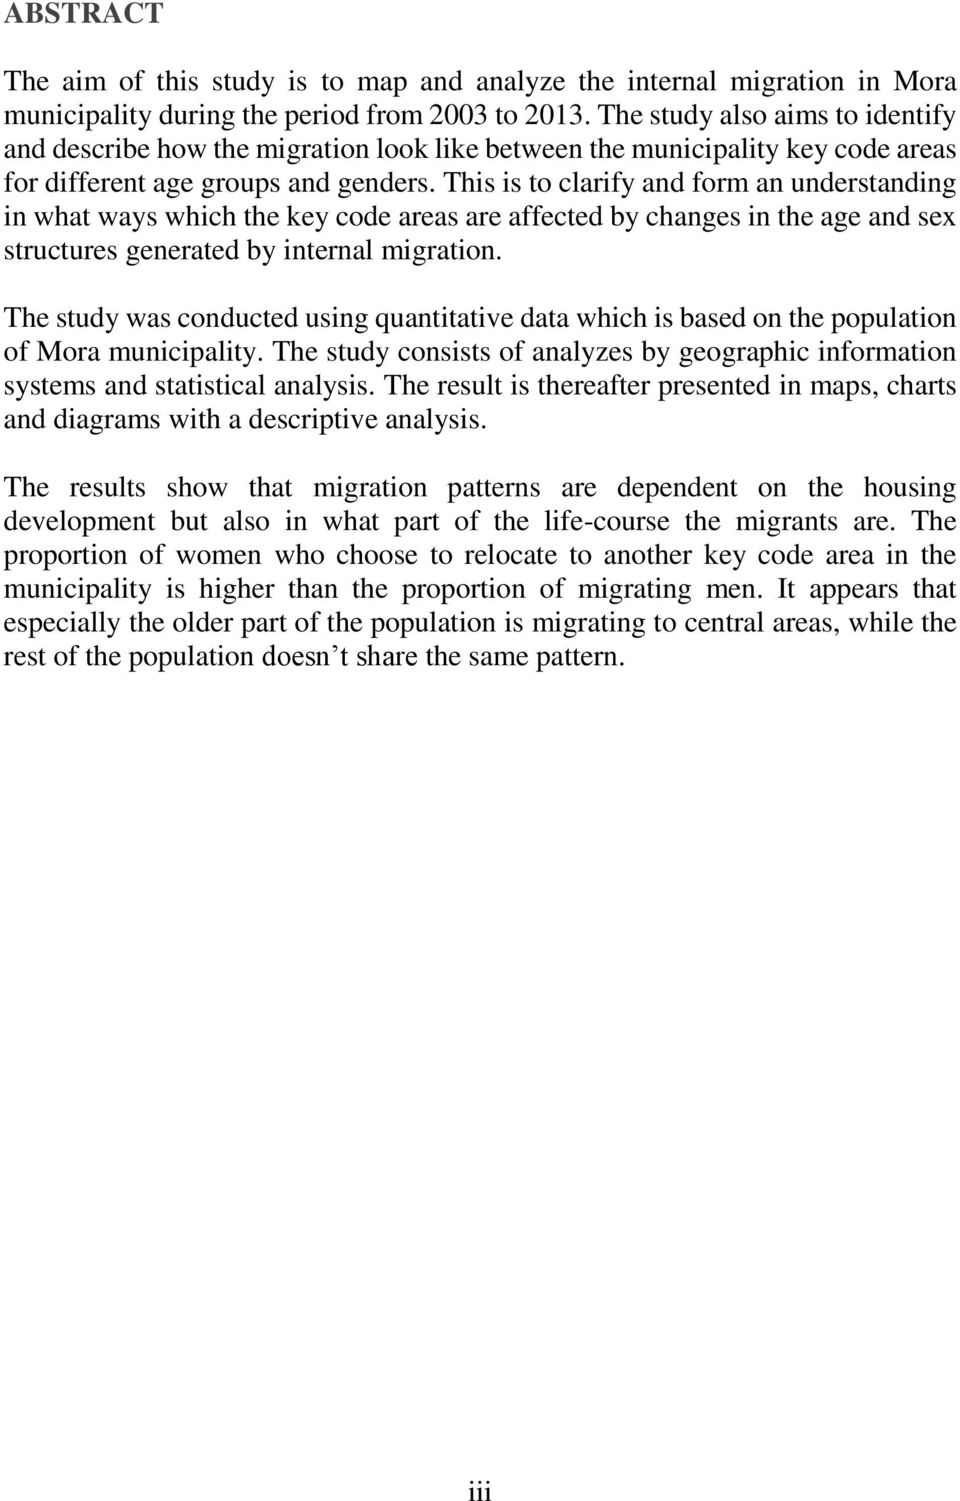 This is to clarify and form an understanding in what ways which the key code areas are affected by changes in the age and sex structures generated by internal migration.